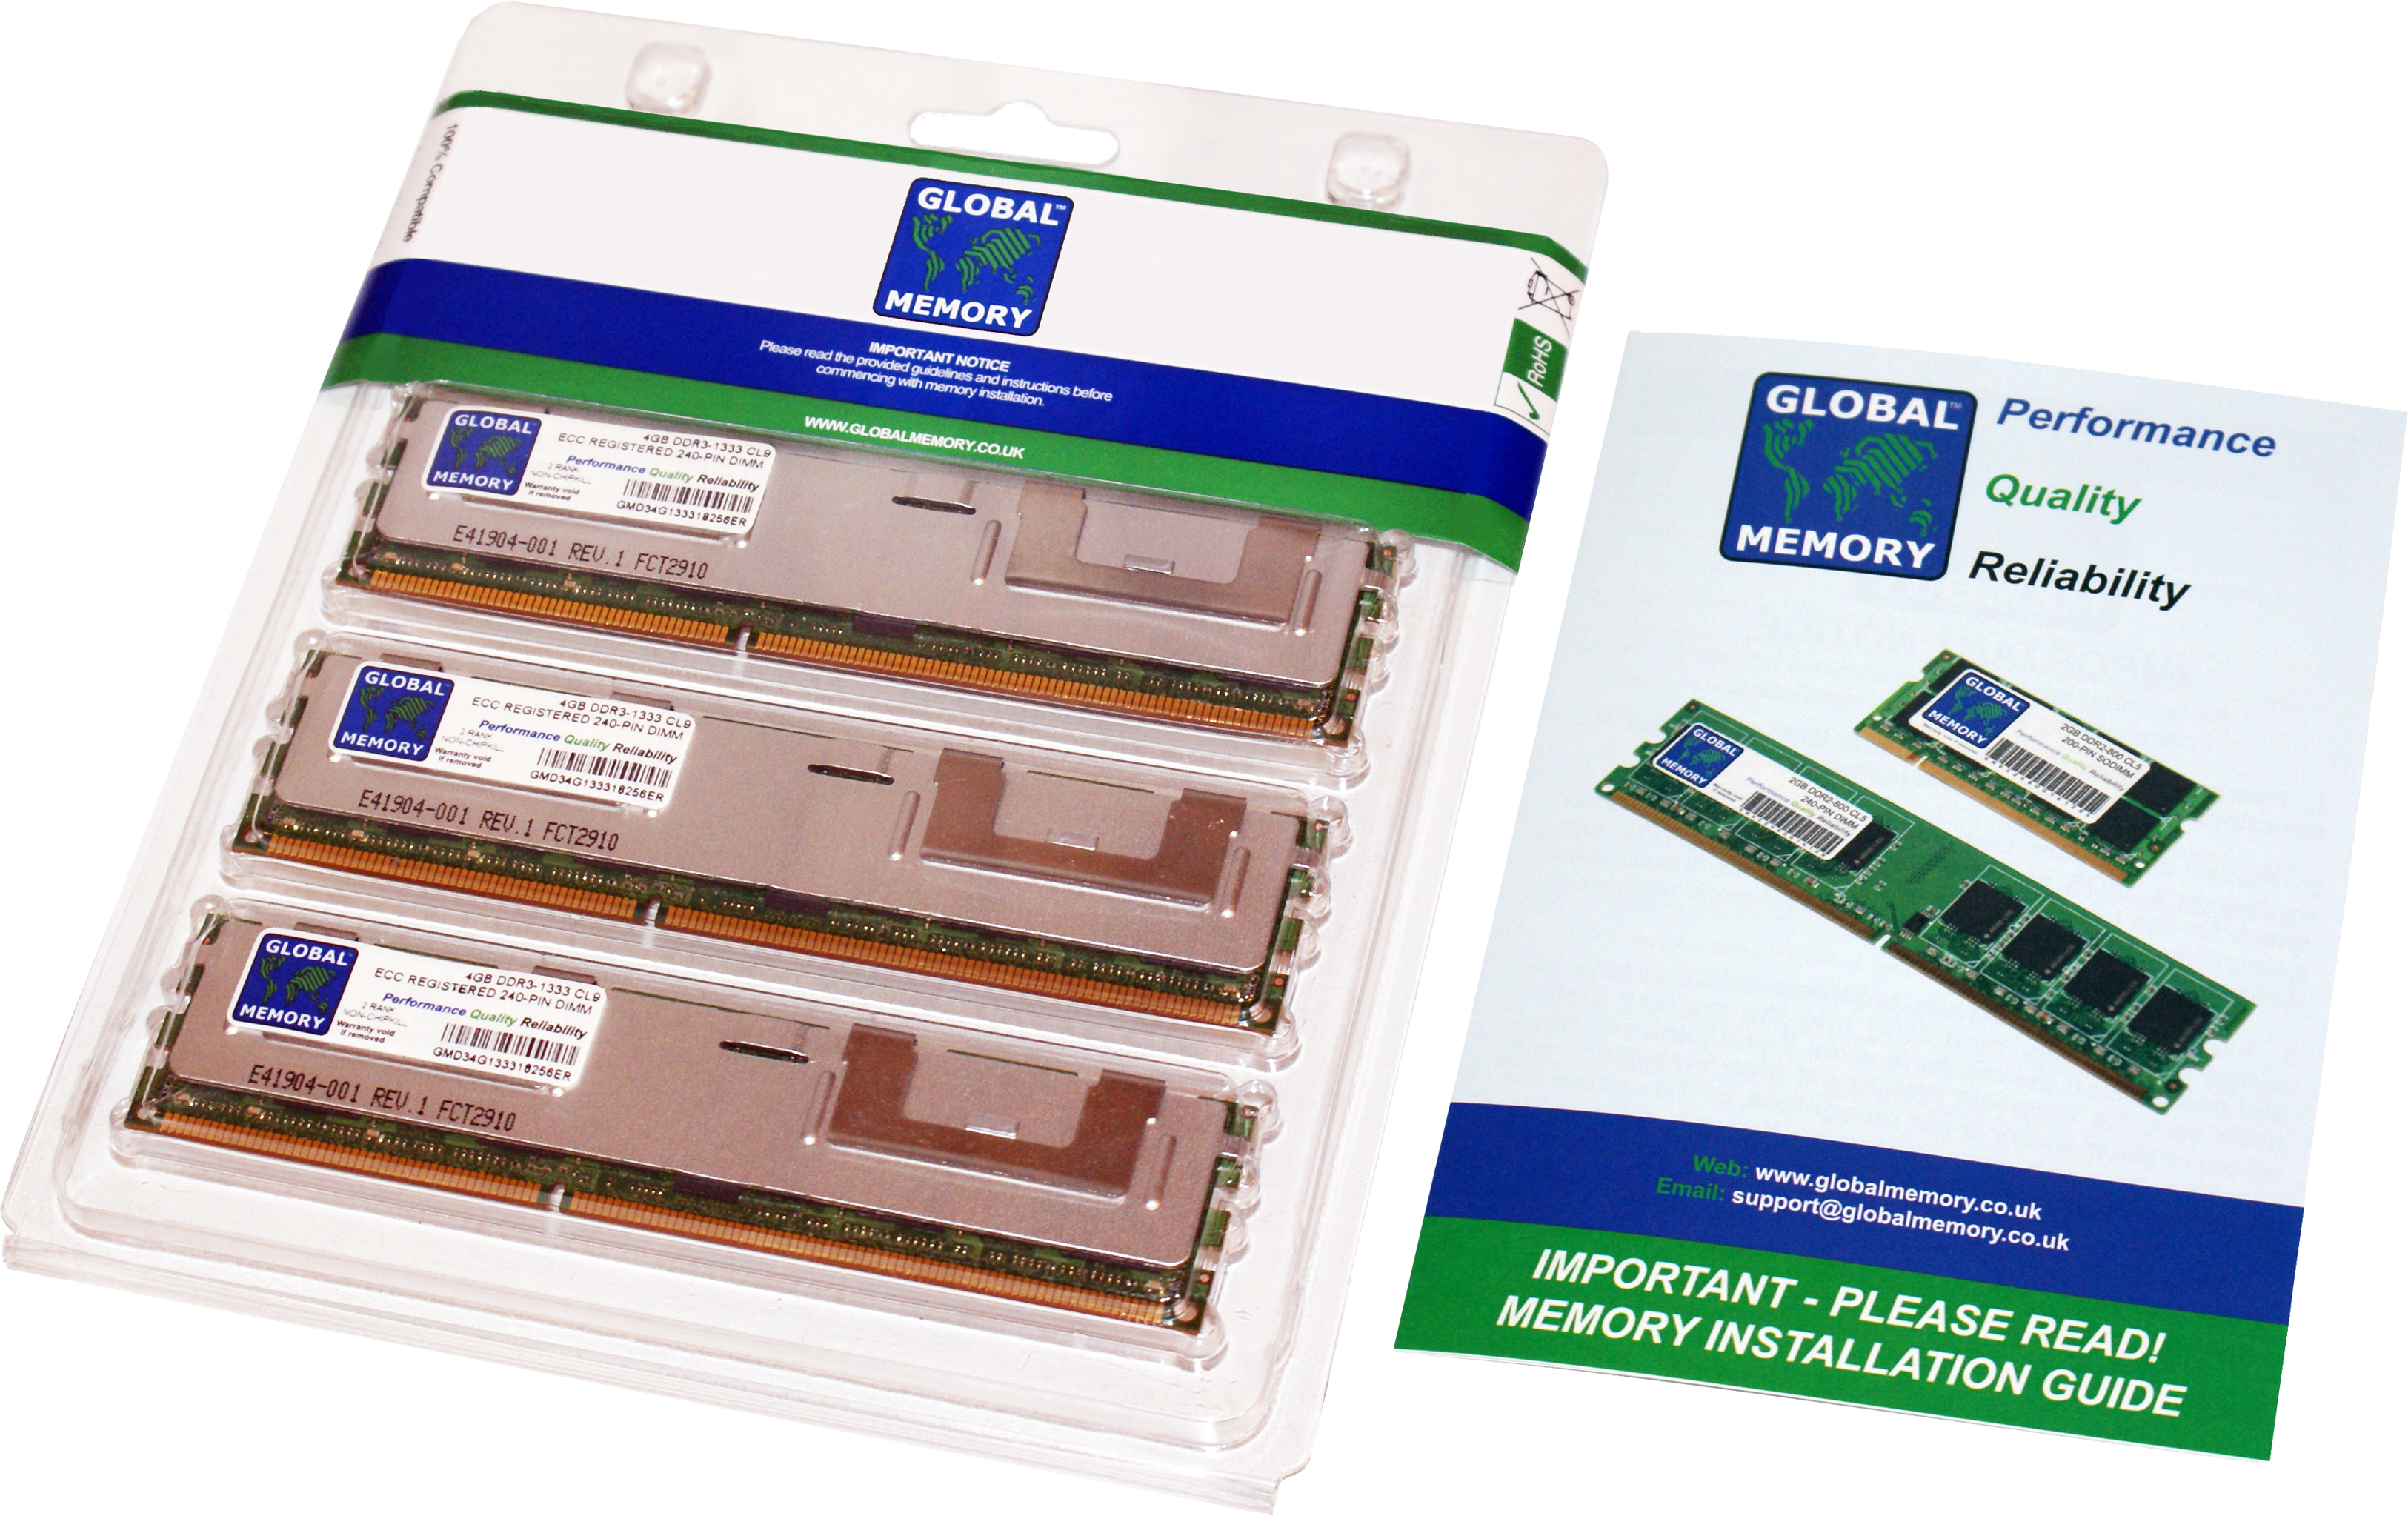 48GB (3 x 16GB) DDR3 1066/1333MHz 240-PIN ECC REGISTERED DIMM (RDIMM) MEMORY RAM KIT FOR SERVERS/WORKSTATIONS/MOTHERBOARDS (12 RANK KIT NON-CHIPKILL)